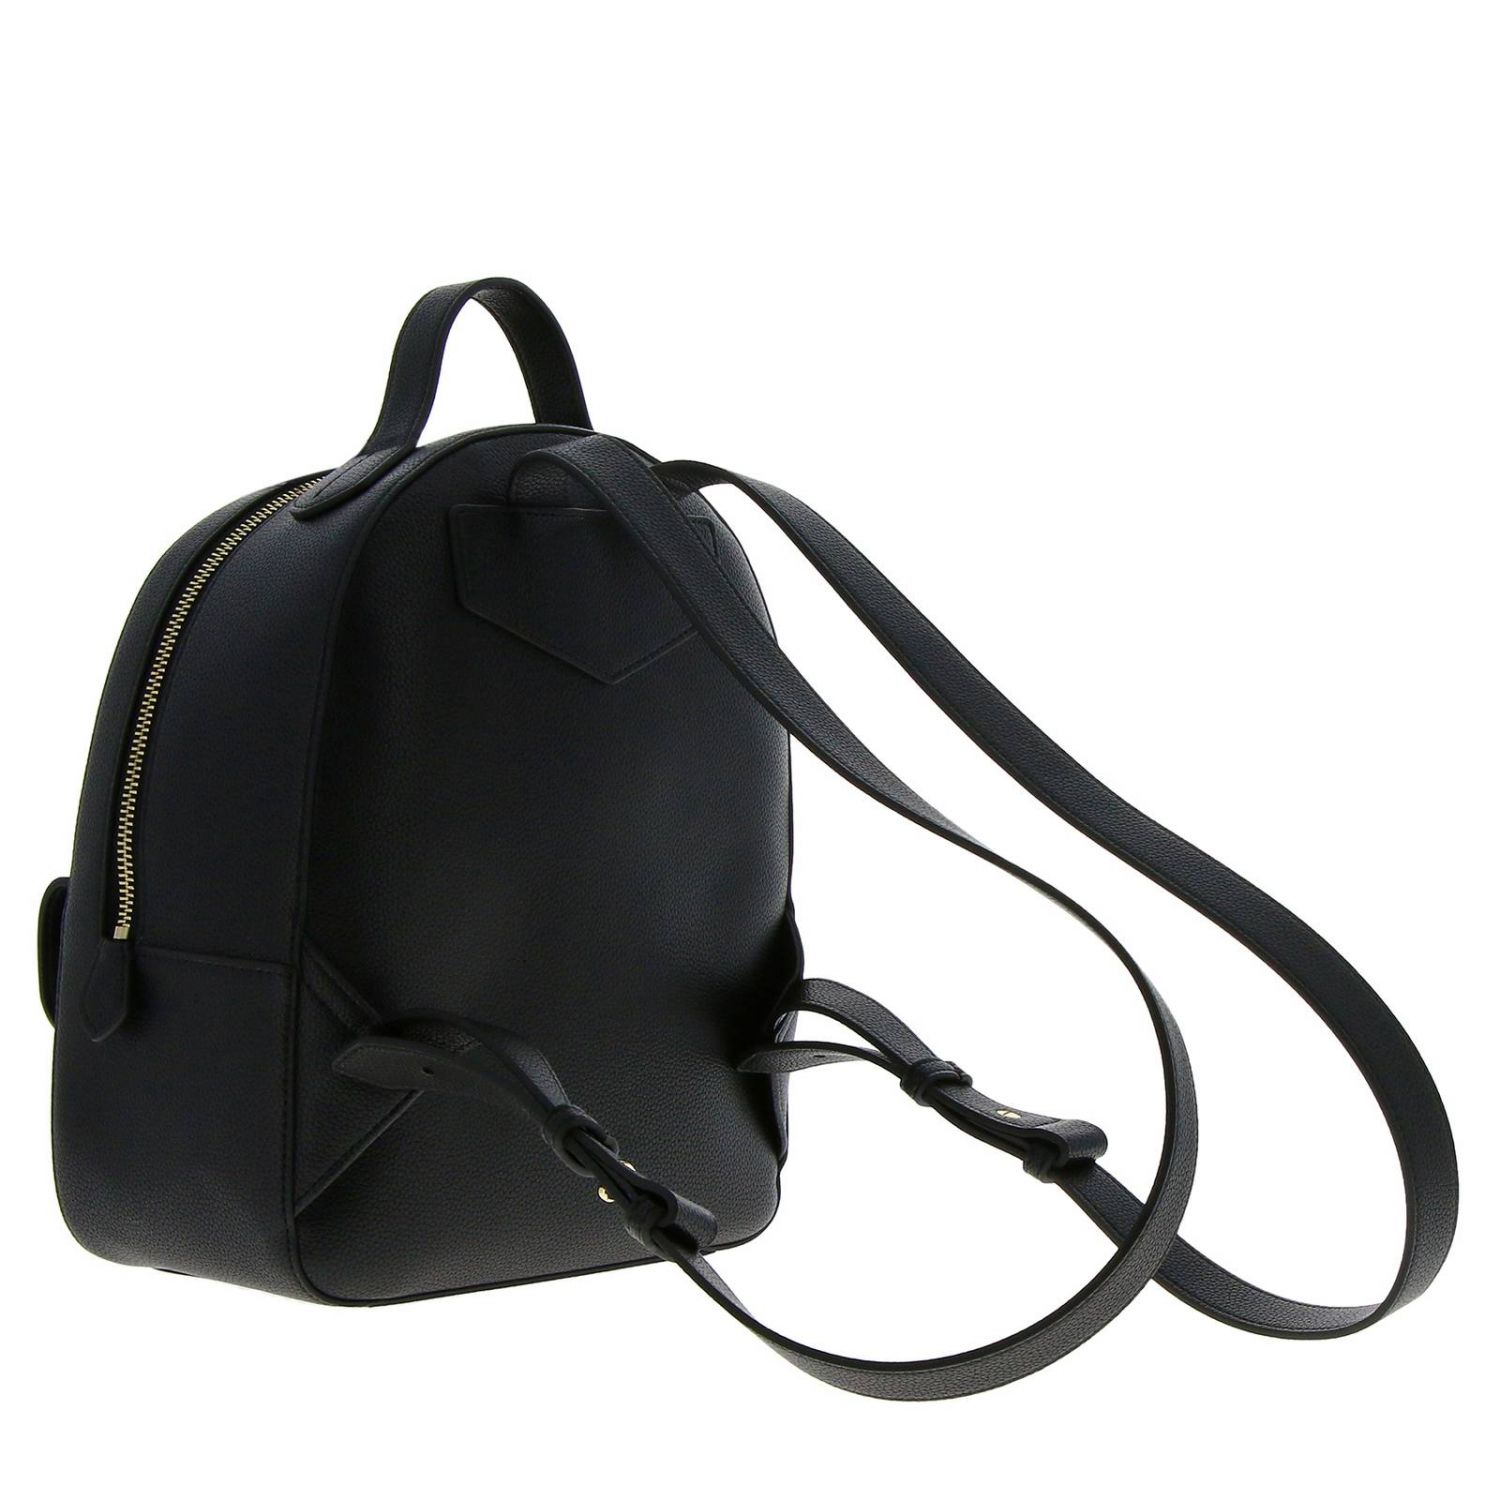 Emporio Armani Outlet: Backpack women - Black | Backpack Emporio Armani ...